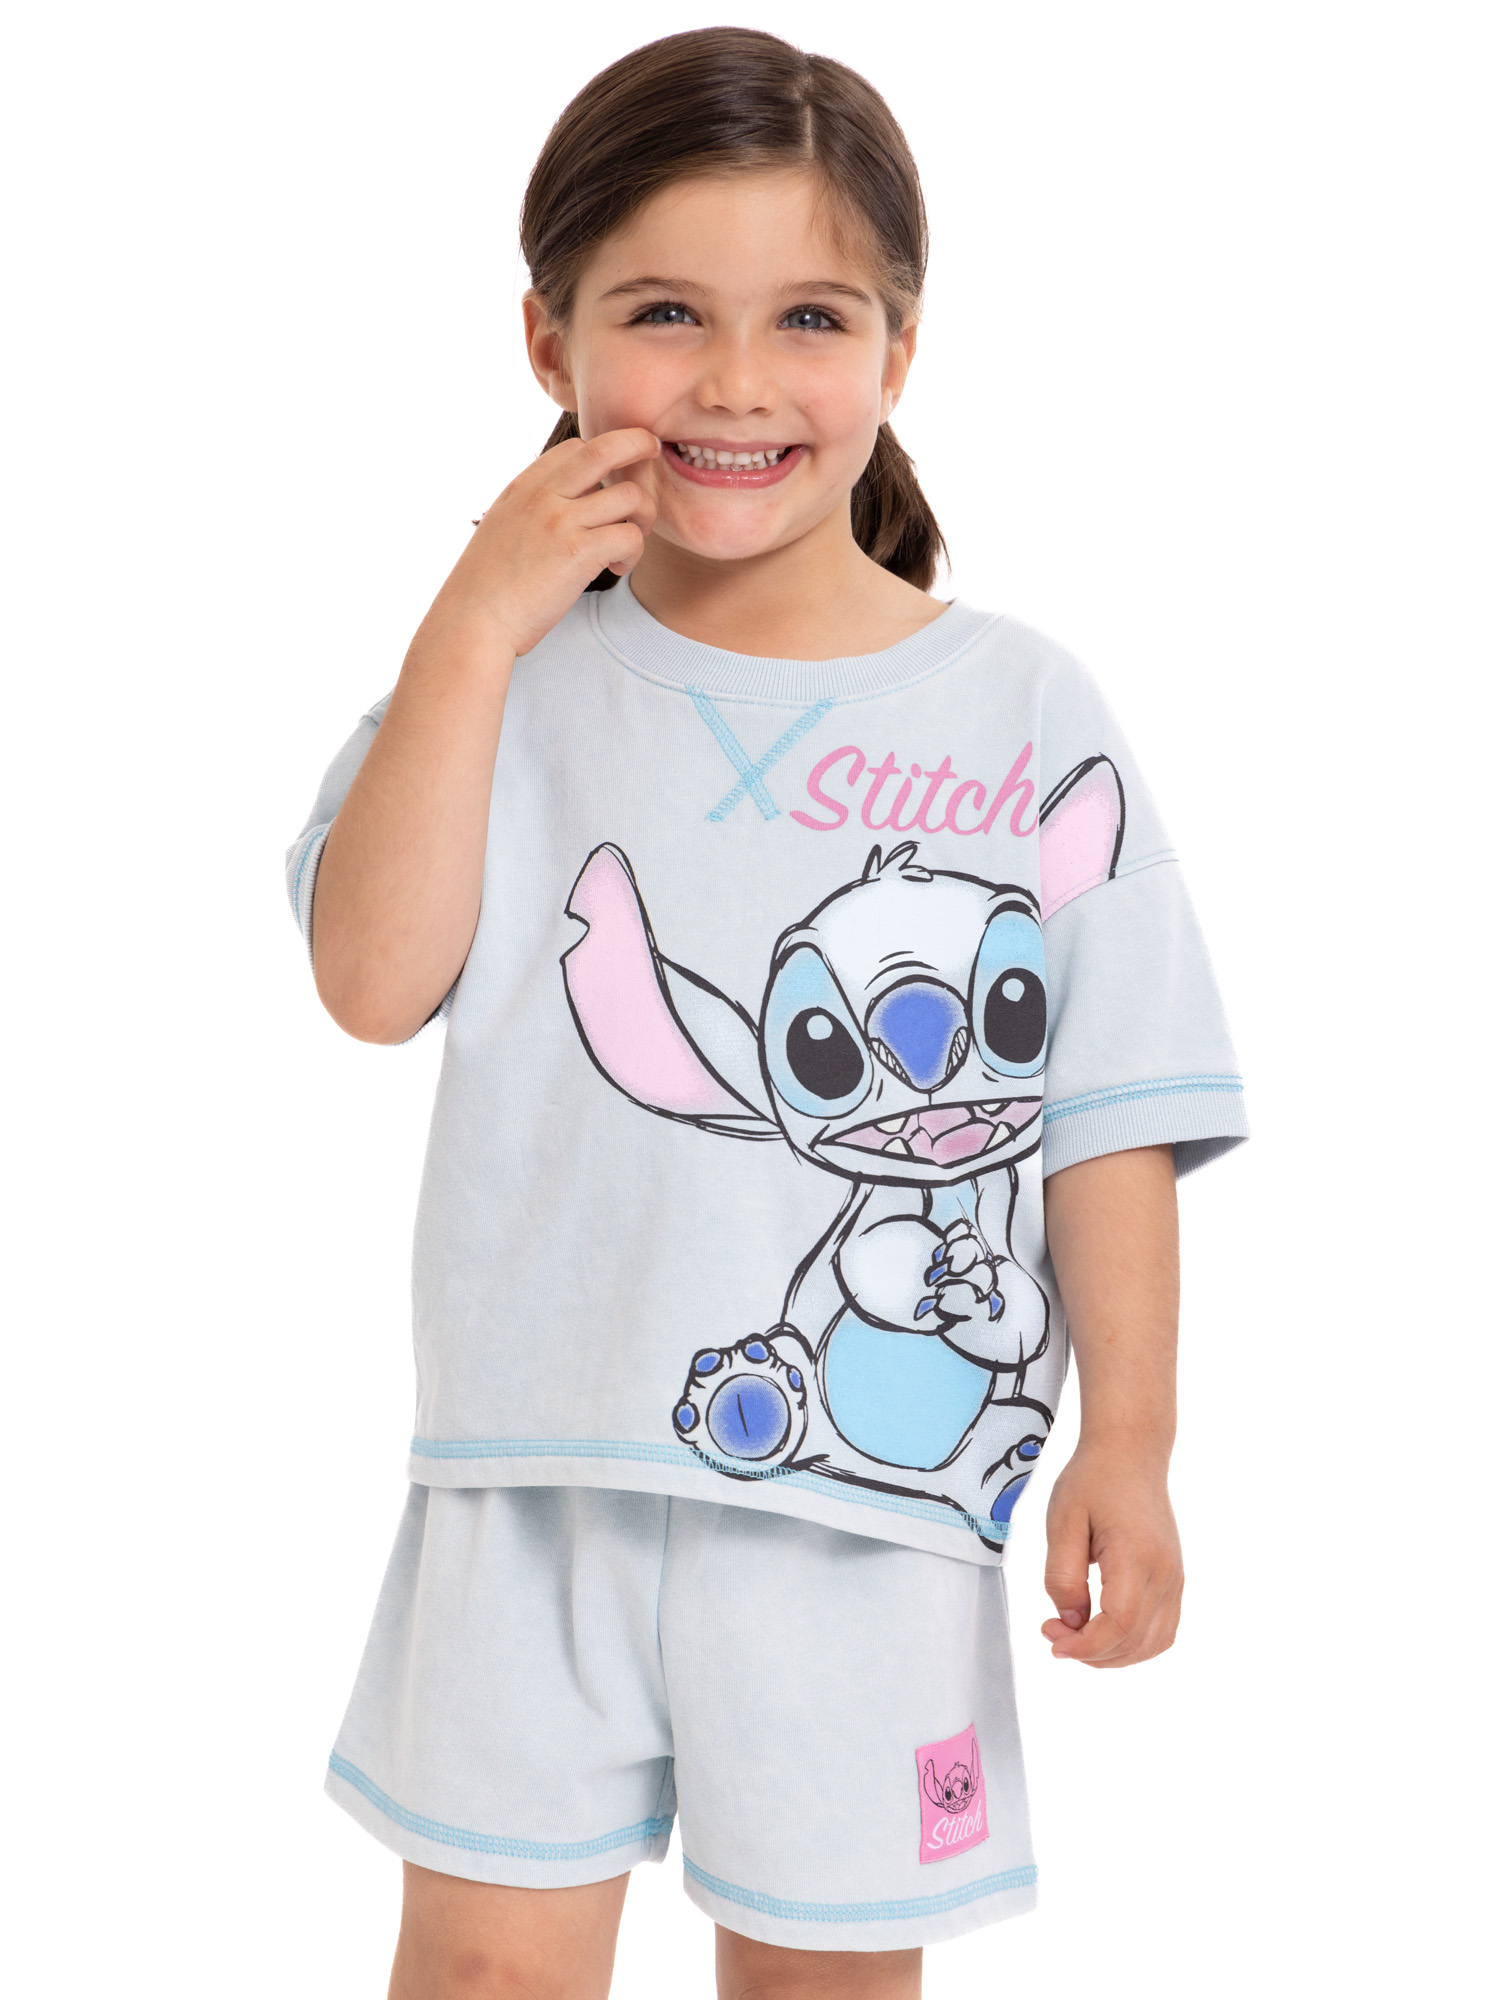 Lilo & Stitch Toddler Girls Tee and Shorts Set, 2-Piece, Sizes 12M-5T - image 3 of 10